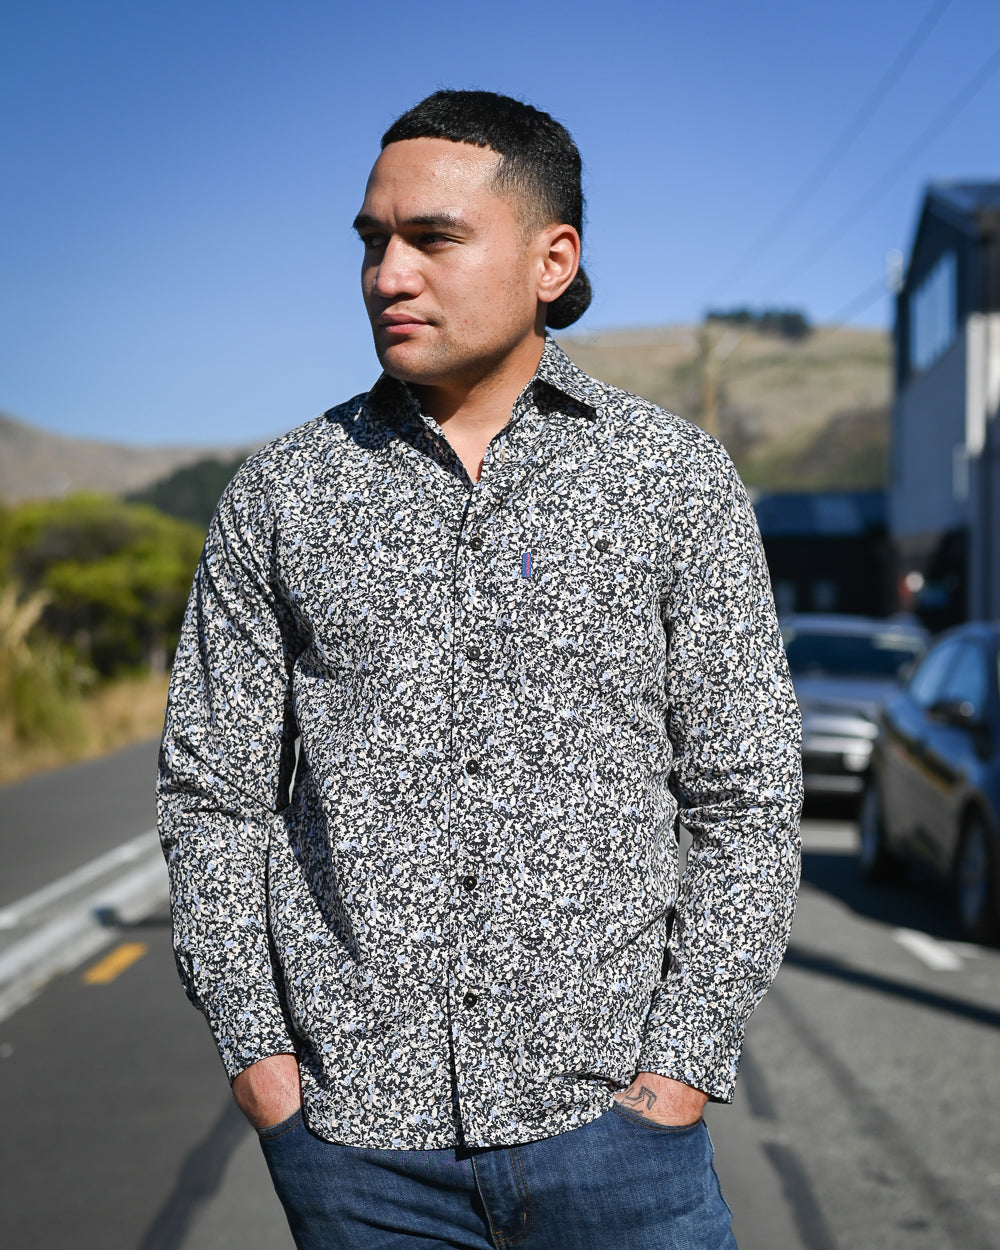 Young Samoan man wearing a long sleeve shirt made out of wood pulp fabric